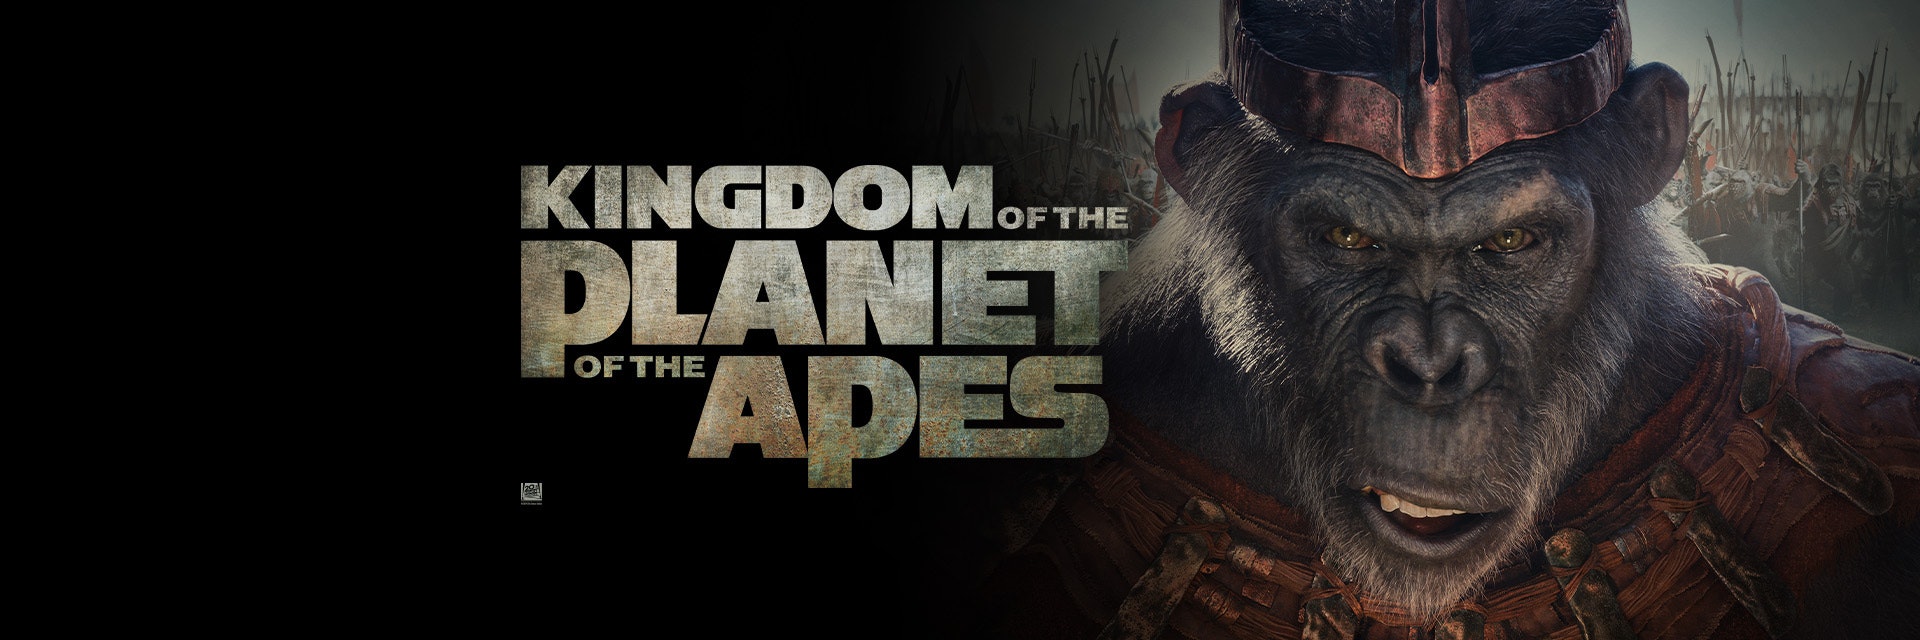 KINGDOM OF THE PLANET OF THE APES character & title treatment